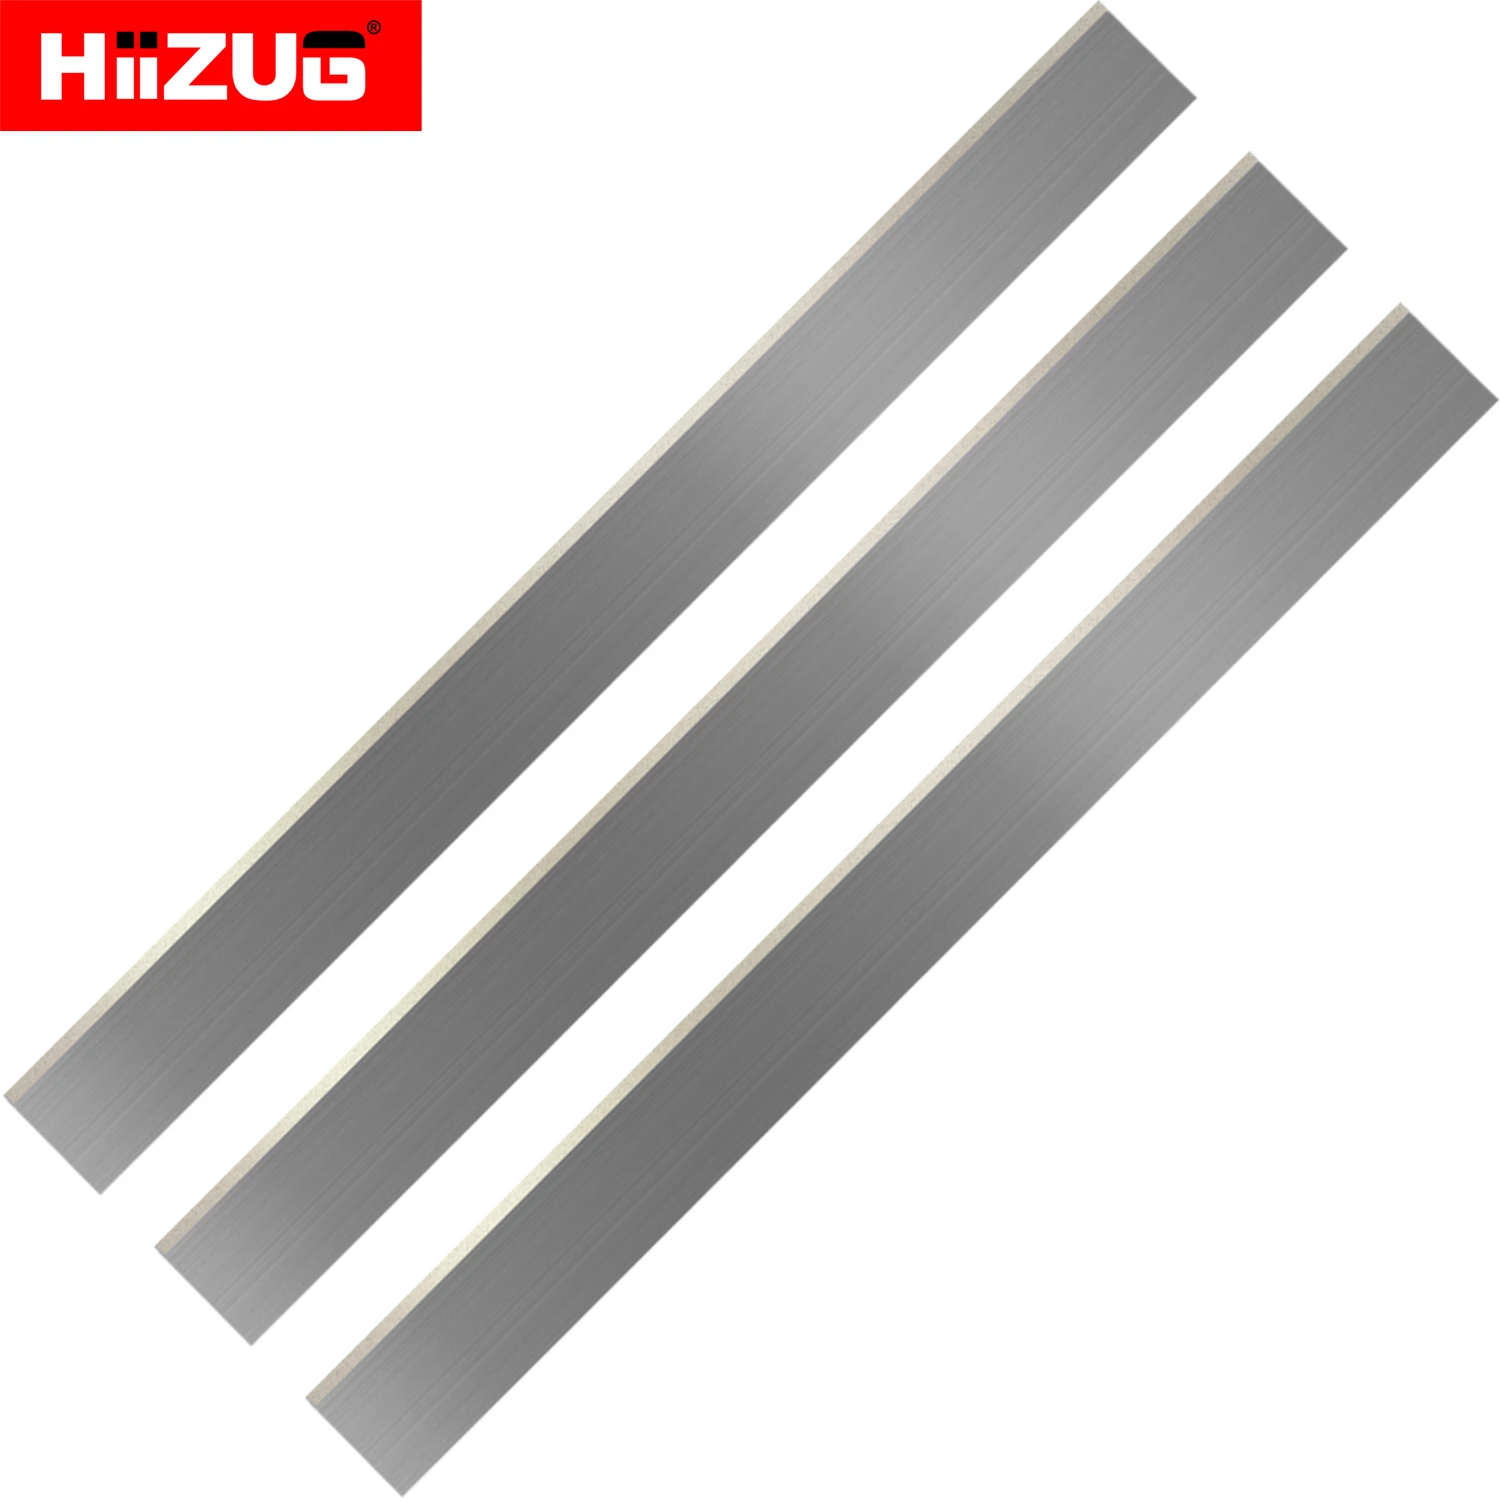 

15 Inch 382mm Planer Blades Knives for Jointer Heads HSS TCT Width 40mm Set of 3 PCS